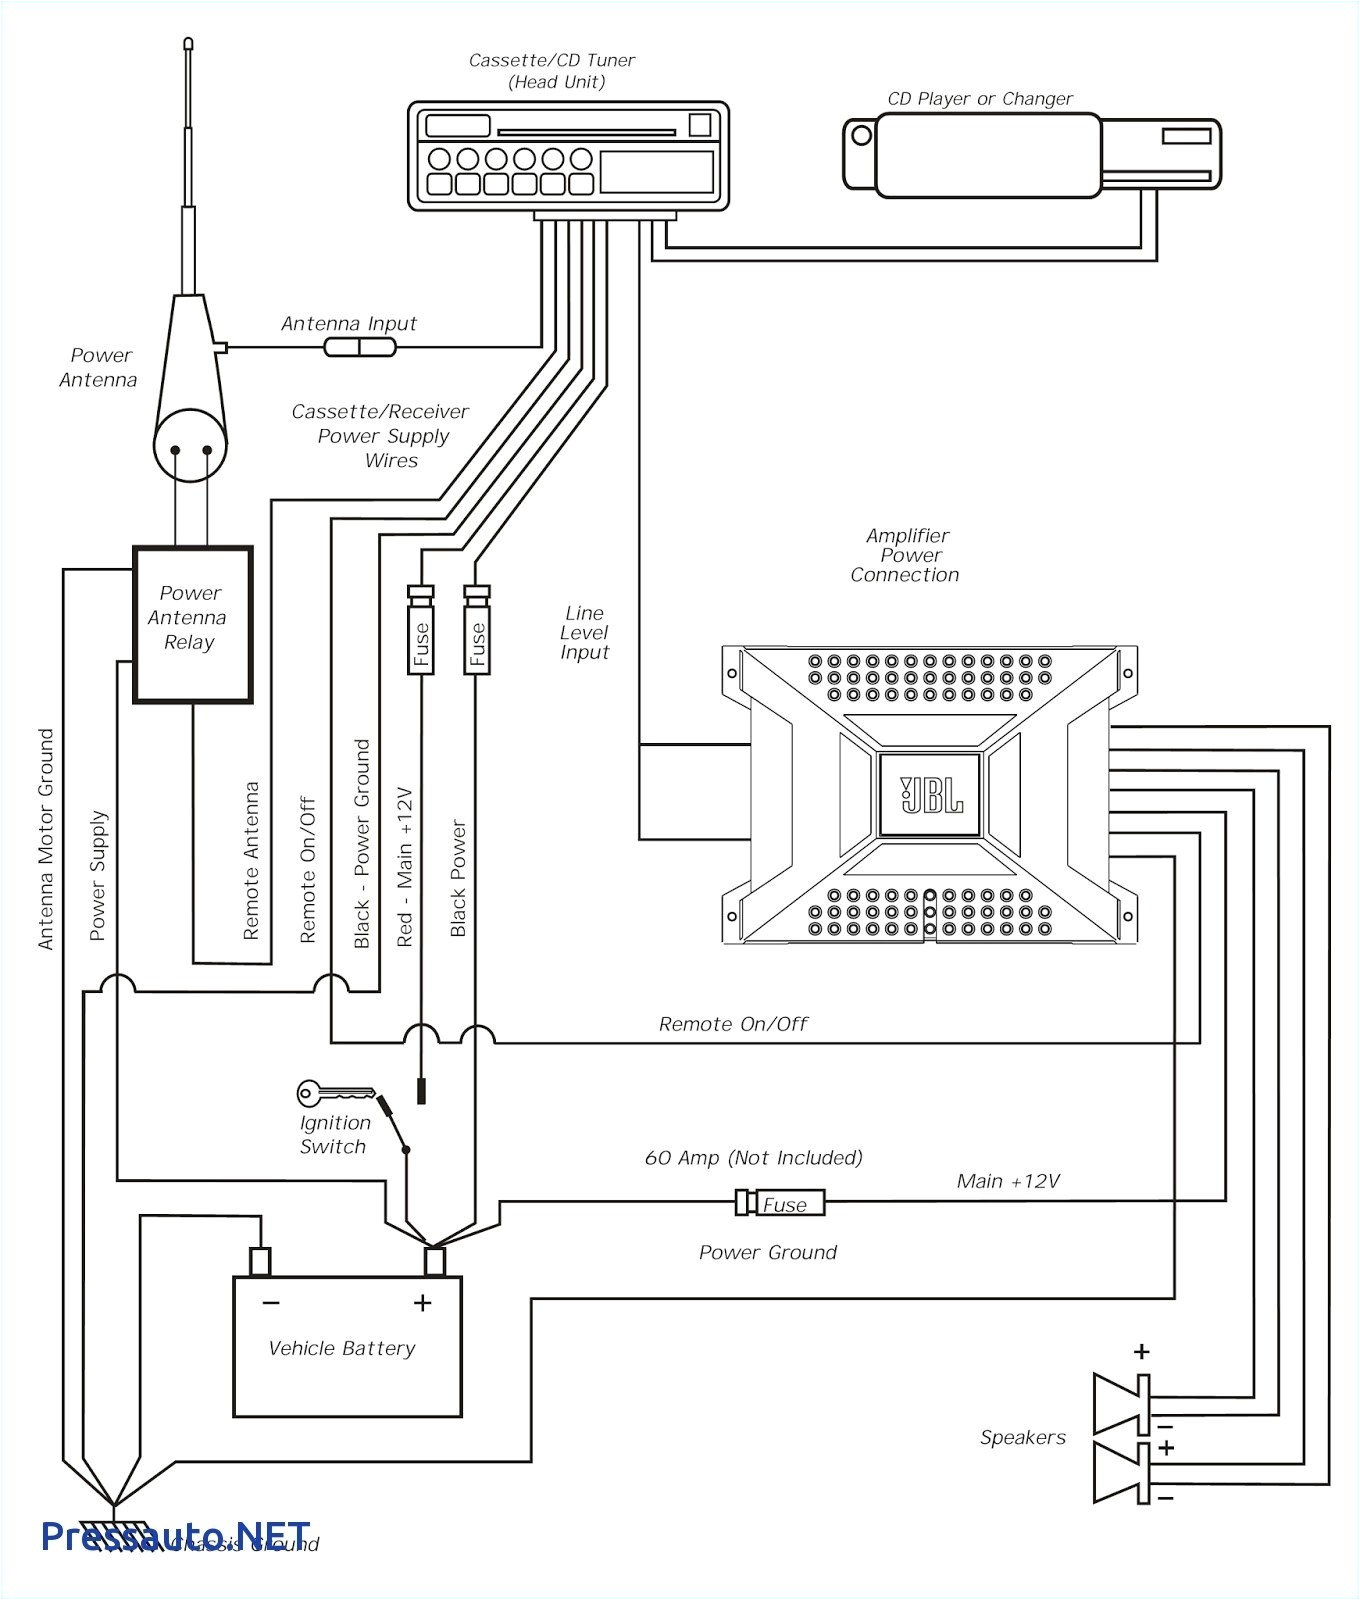 Jvc Kd R530 Wiring Diagram Dg 6129 In Addition Car Wiring Diagram together with Wiring